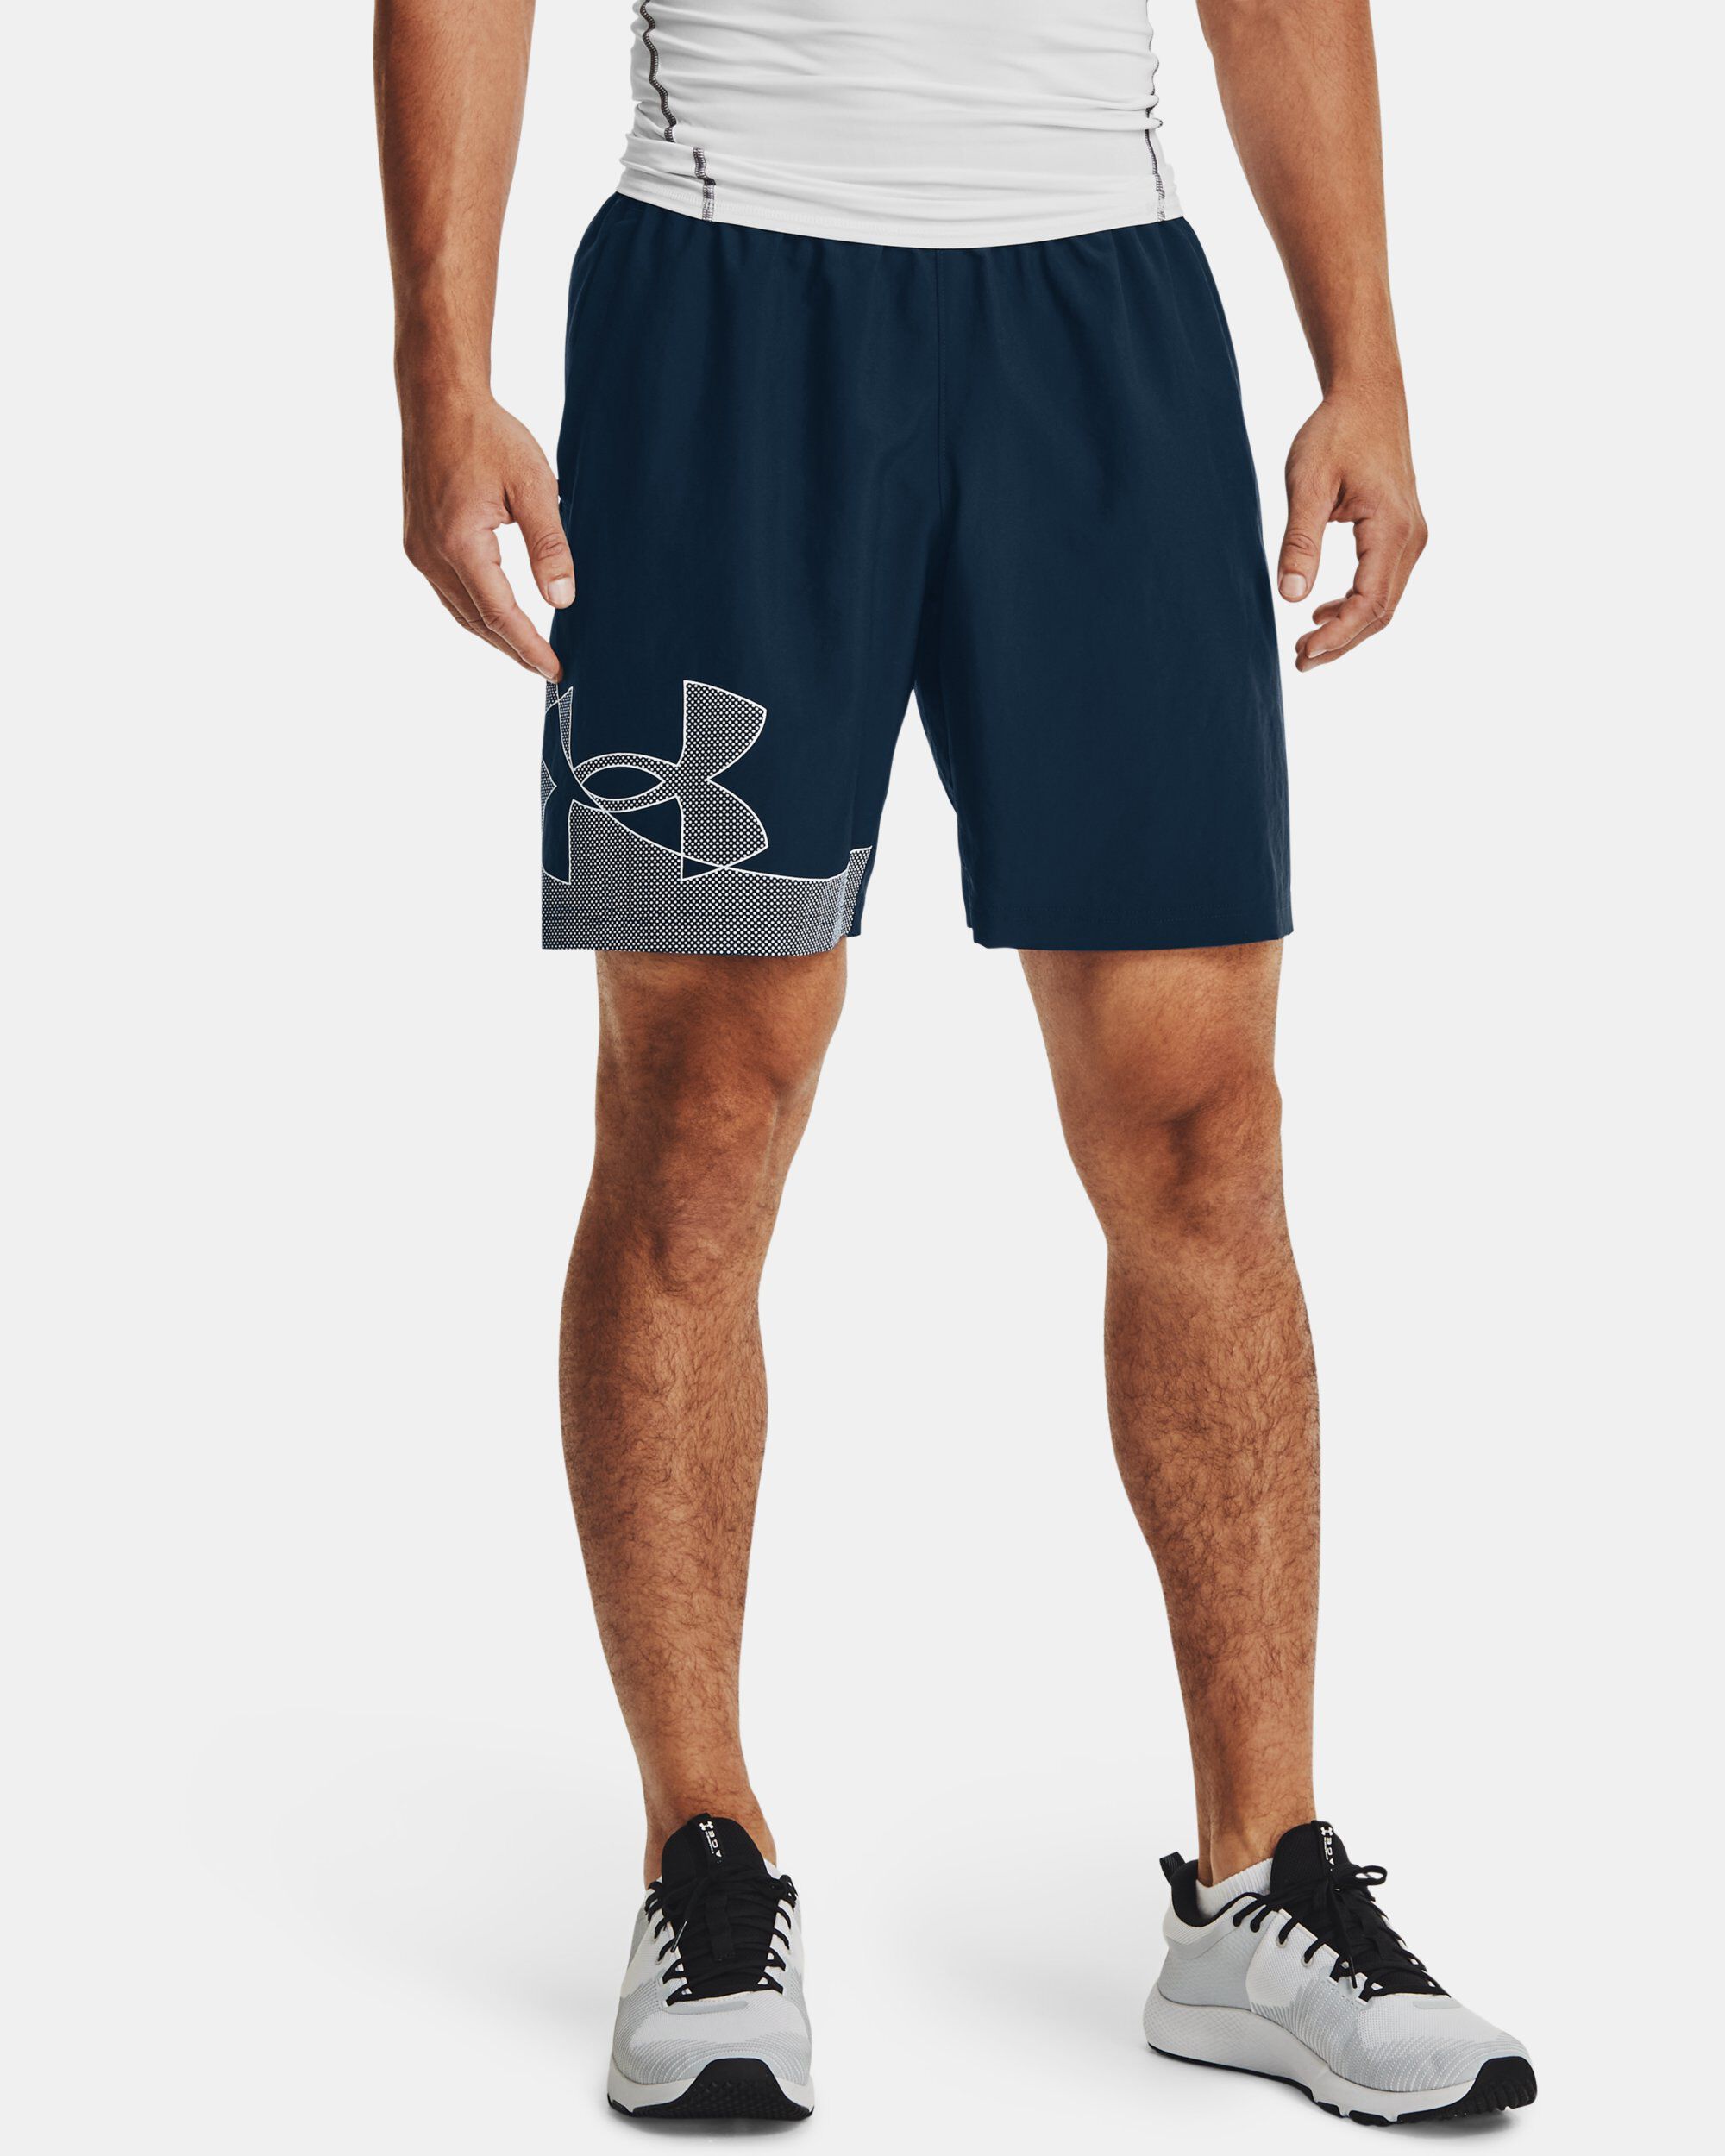 Pantaloncino Uomo Under Armour Rival Exploded Graphic Short